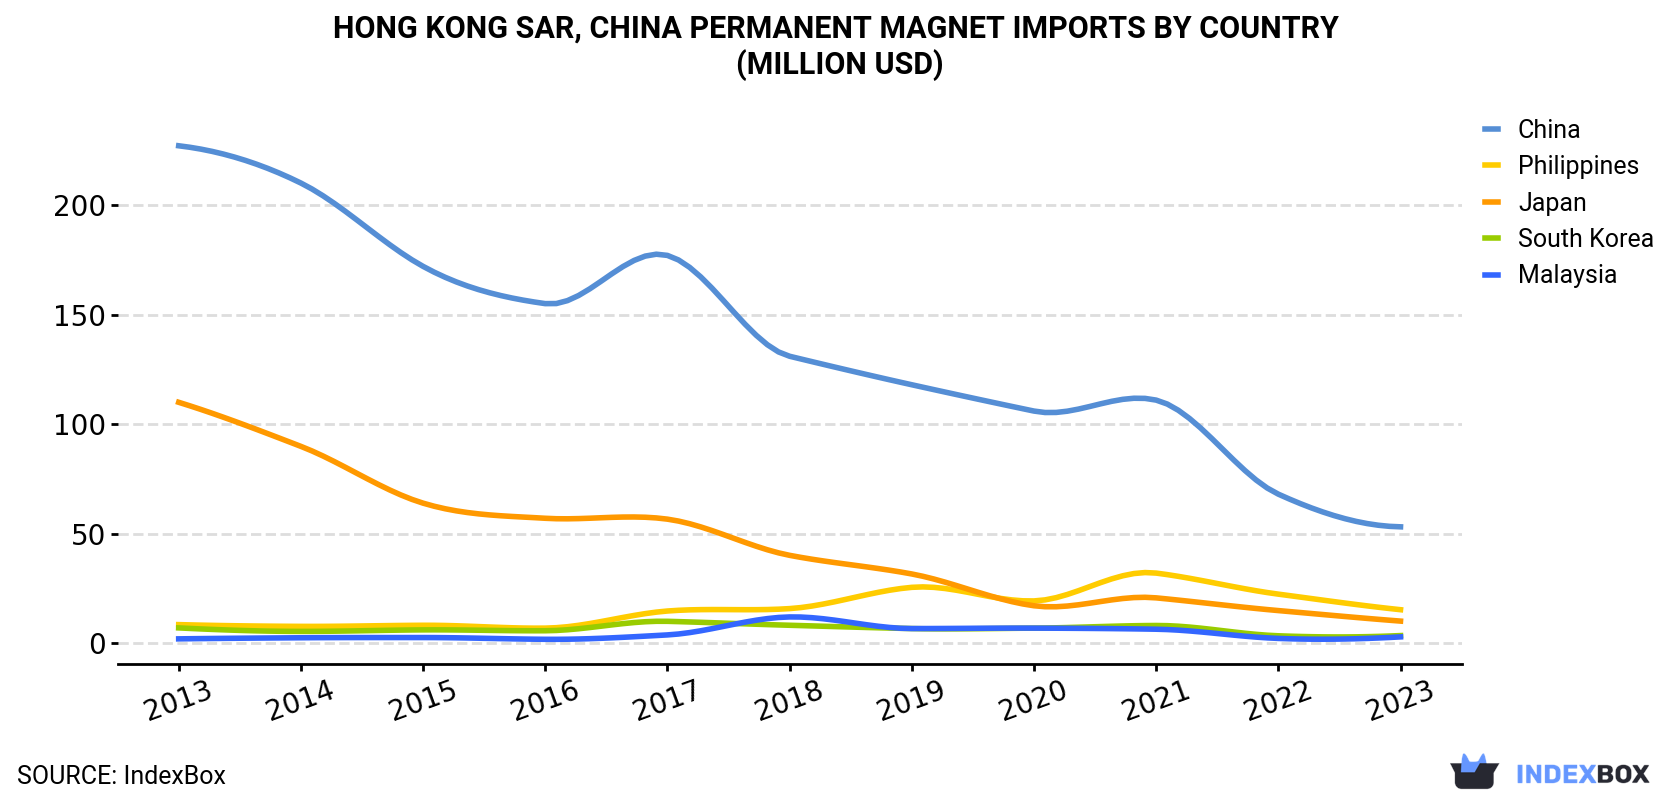 Hong Kong Permanent Magnet Imports By Country (Million USD)